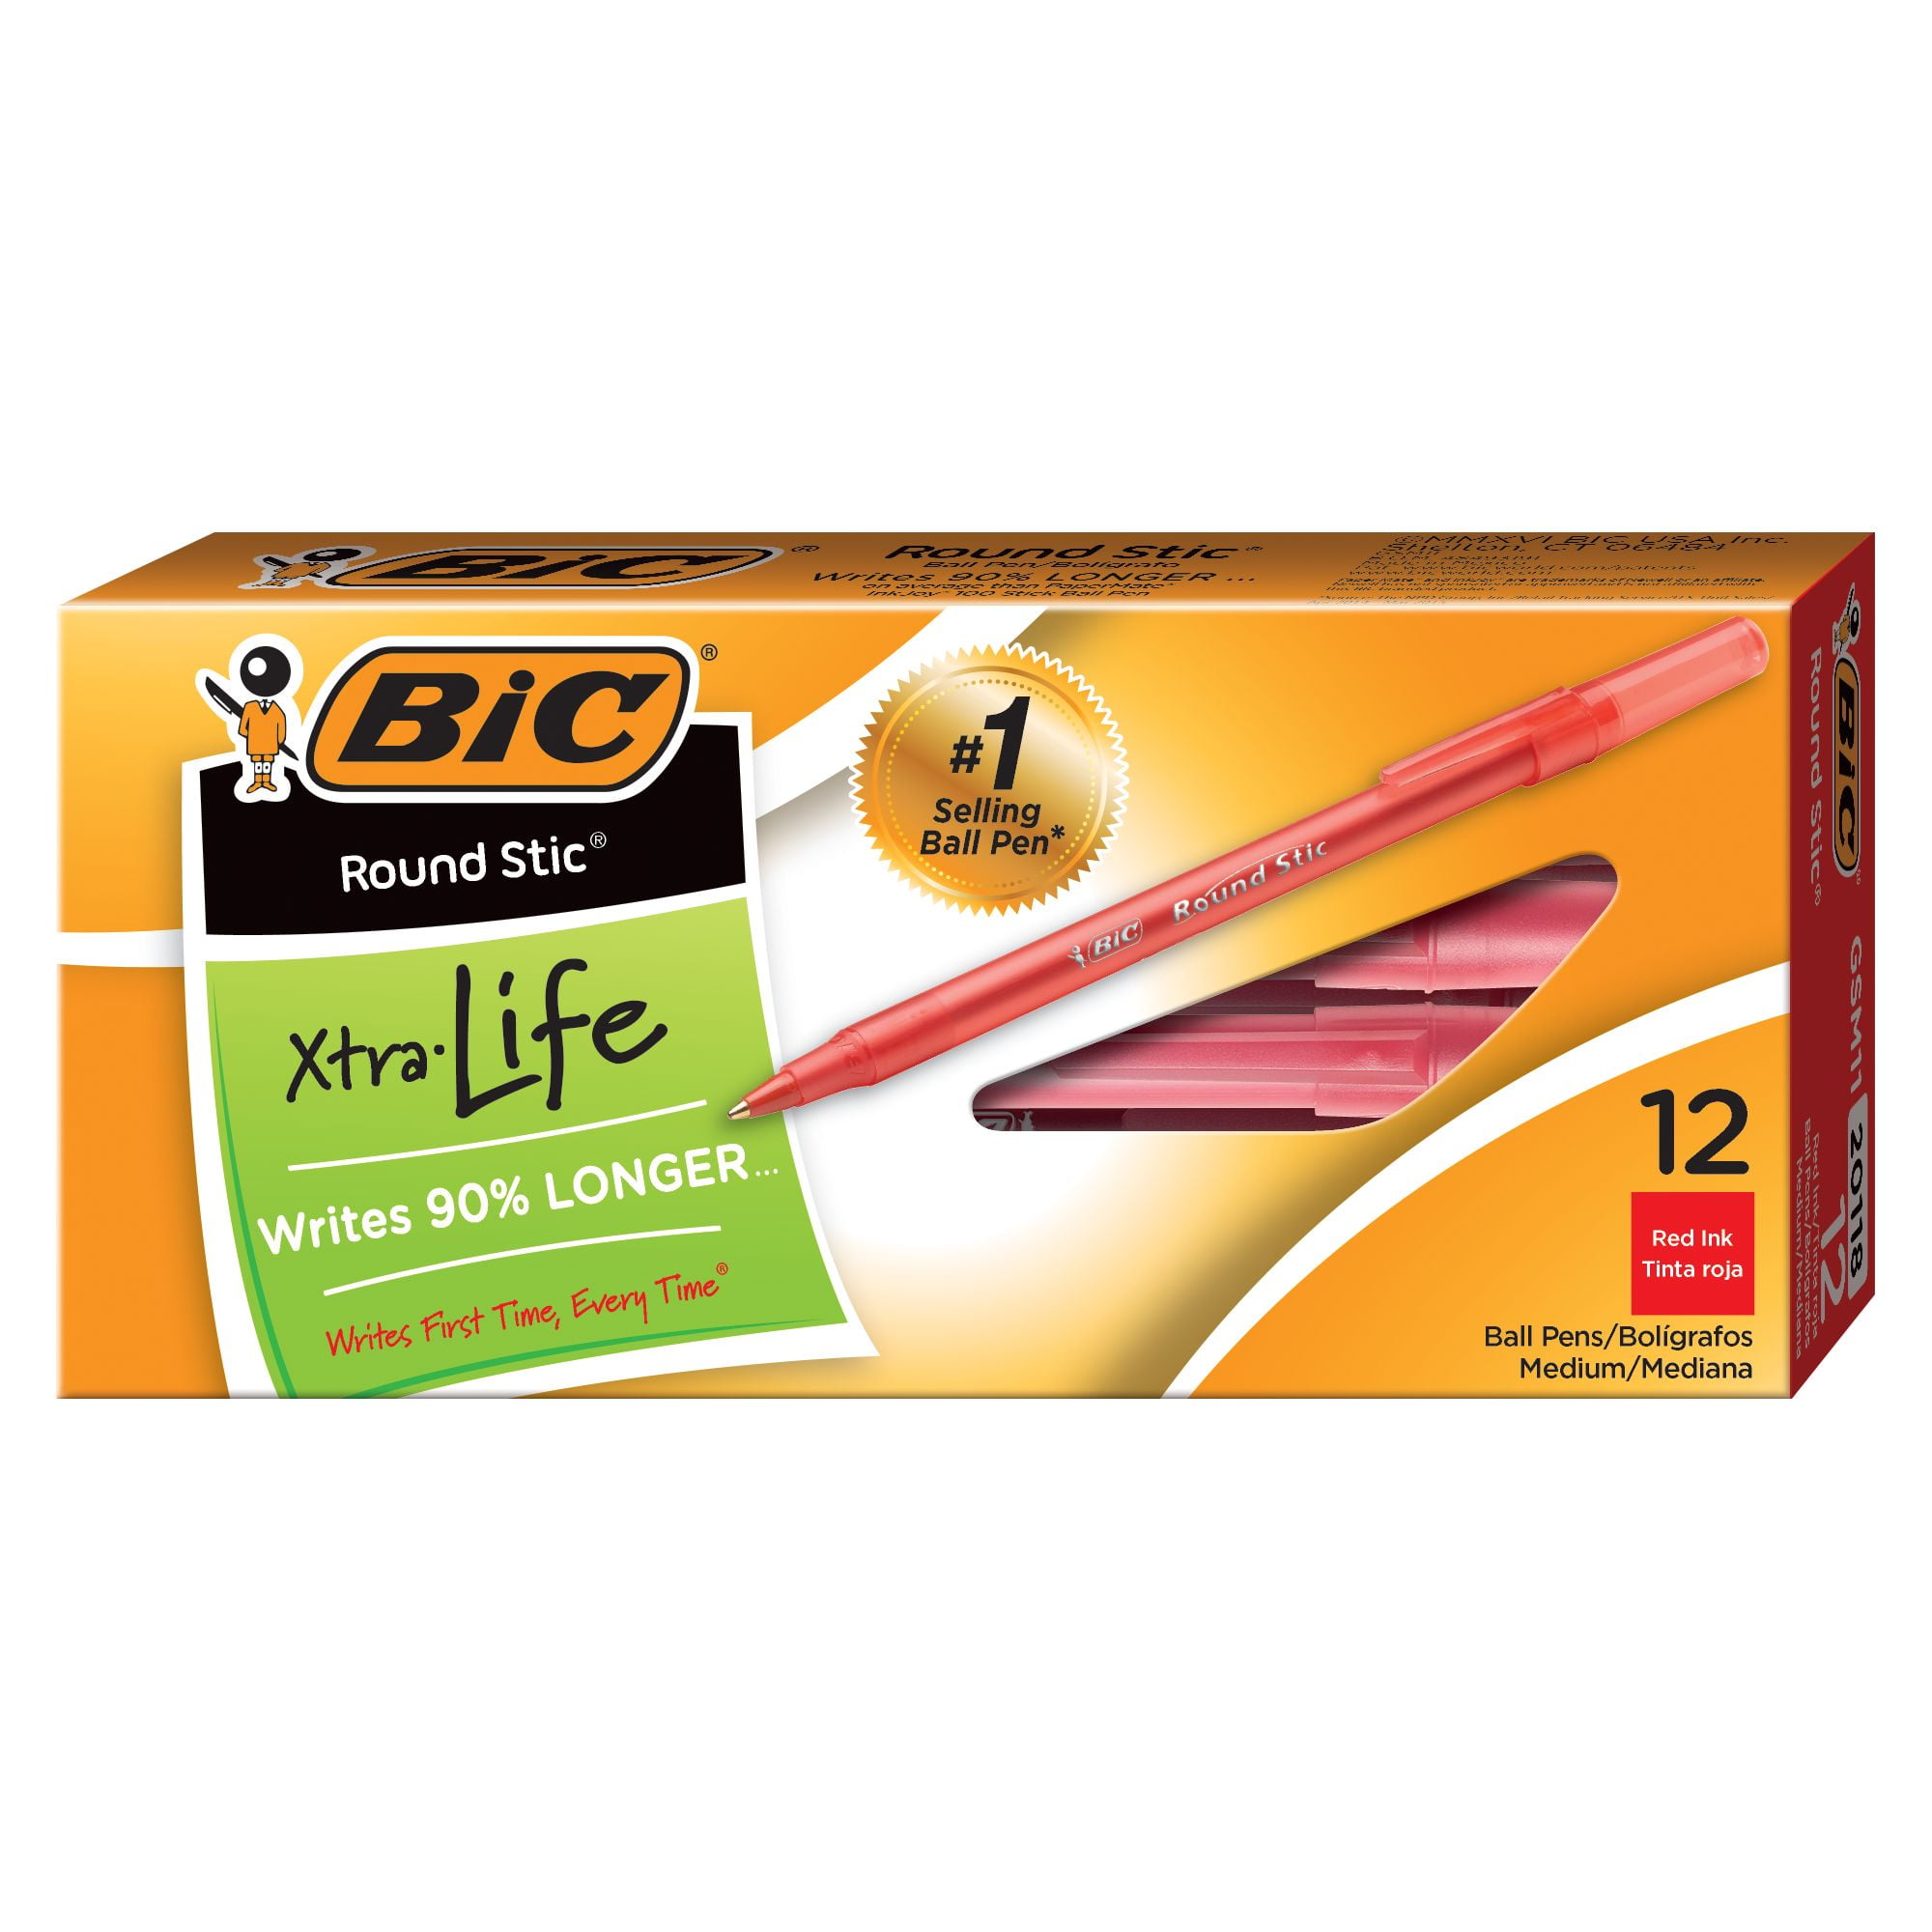 BIC Round Stic Xtra Life Ball Pen, Medium Point (1.0mm), Red, 12 Count,  Flexible Round Barrel for Writing Comfort